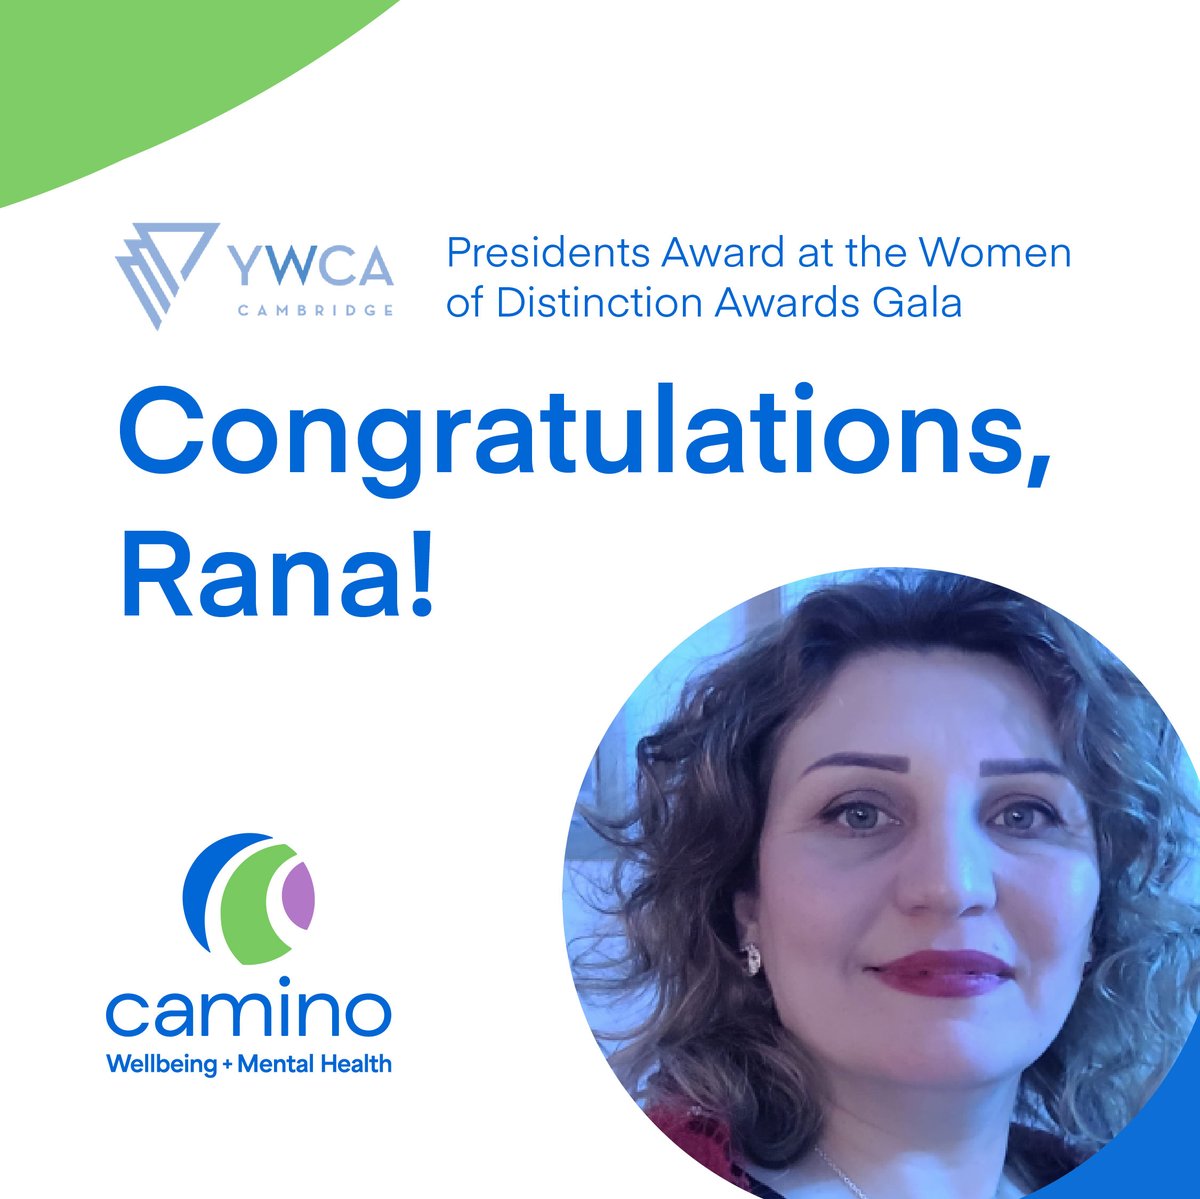 [Follow @CaminoWellbeing for more. This account will be inactive soon.] On June 14, Rana Mohammad, Service System Navigator with Camino, is being honoured with the @/ywcacambridge Presidents Award. We offer heartfelt congratulations to Rana!